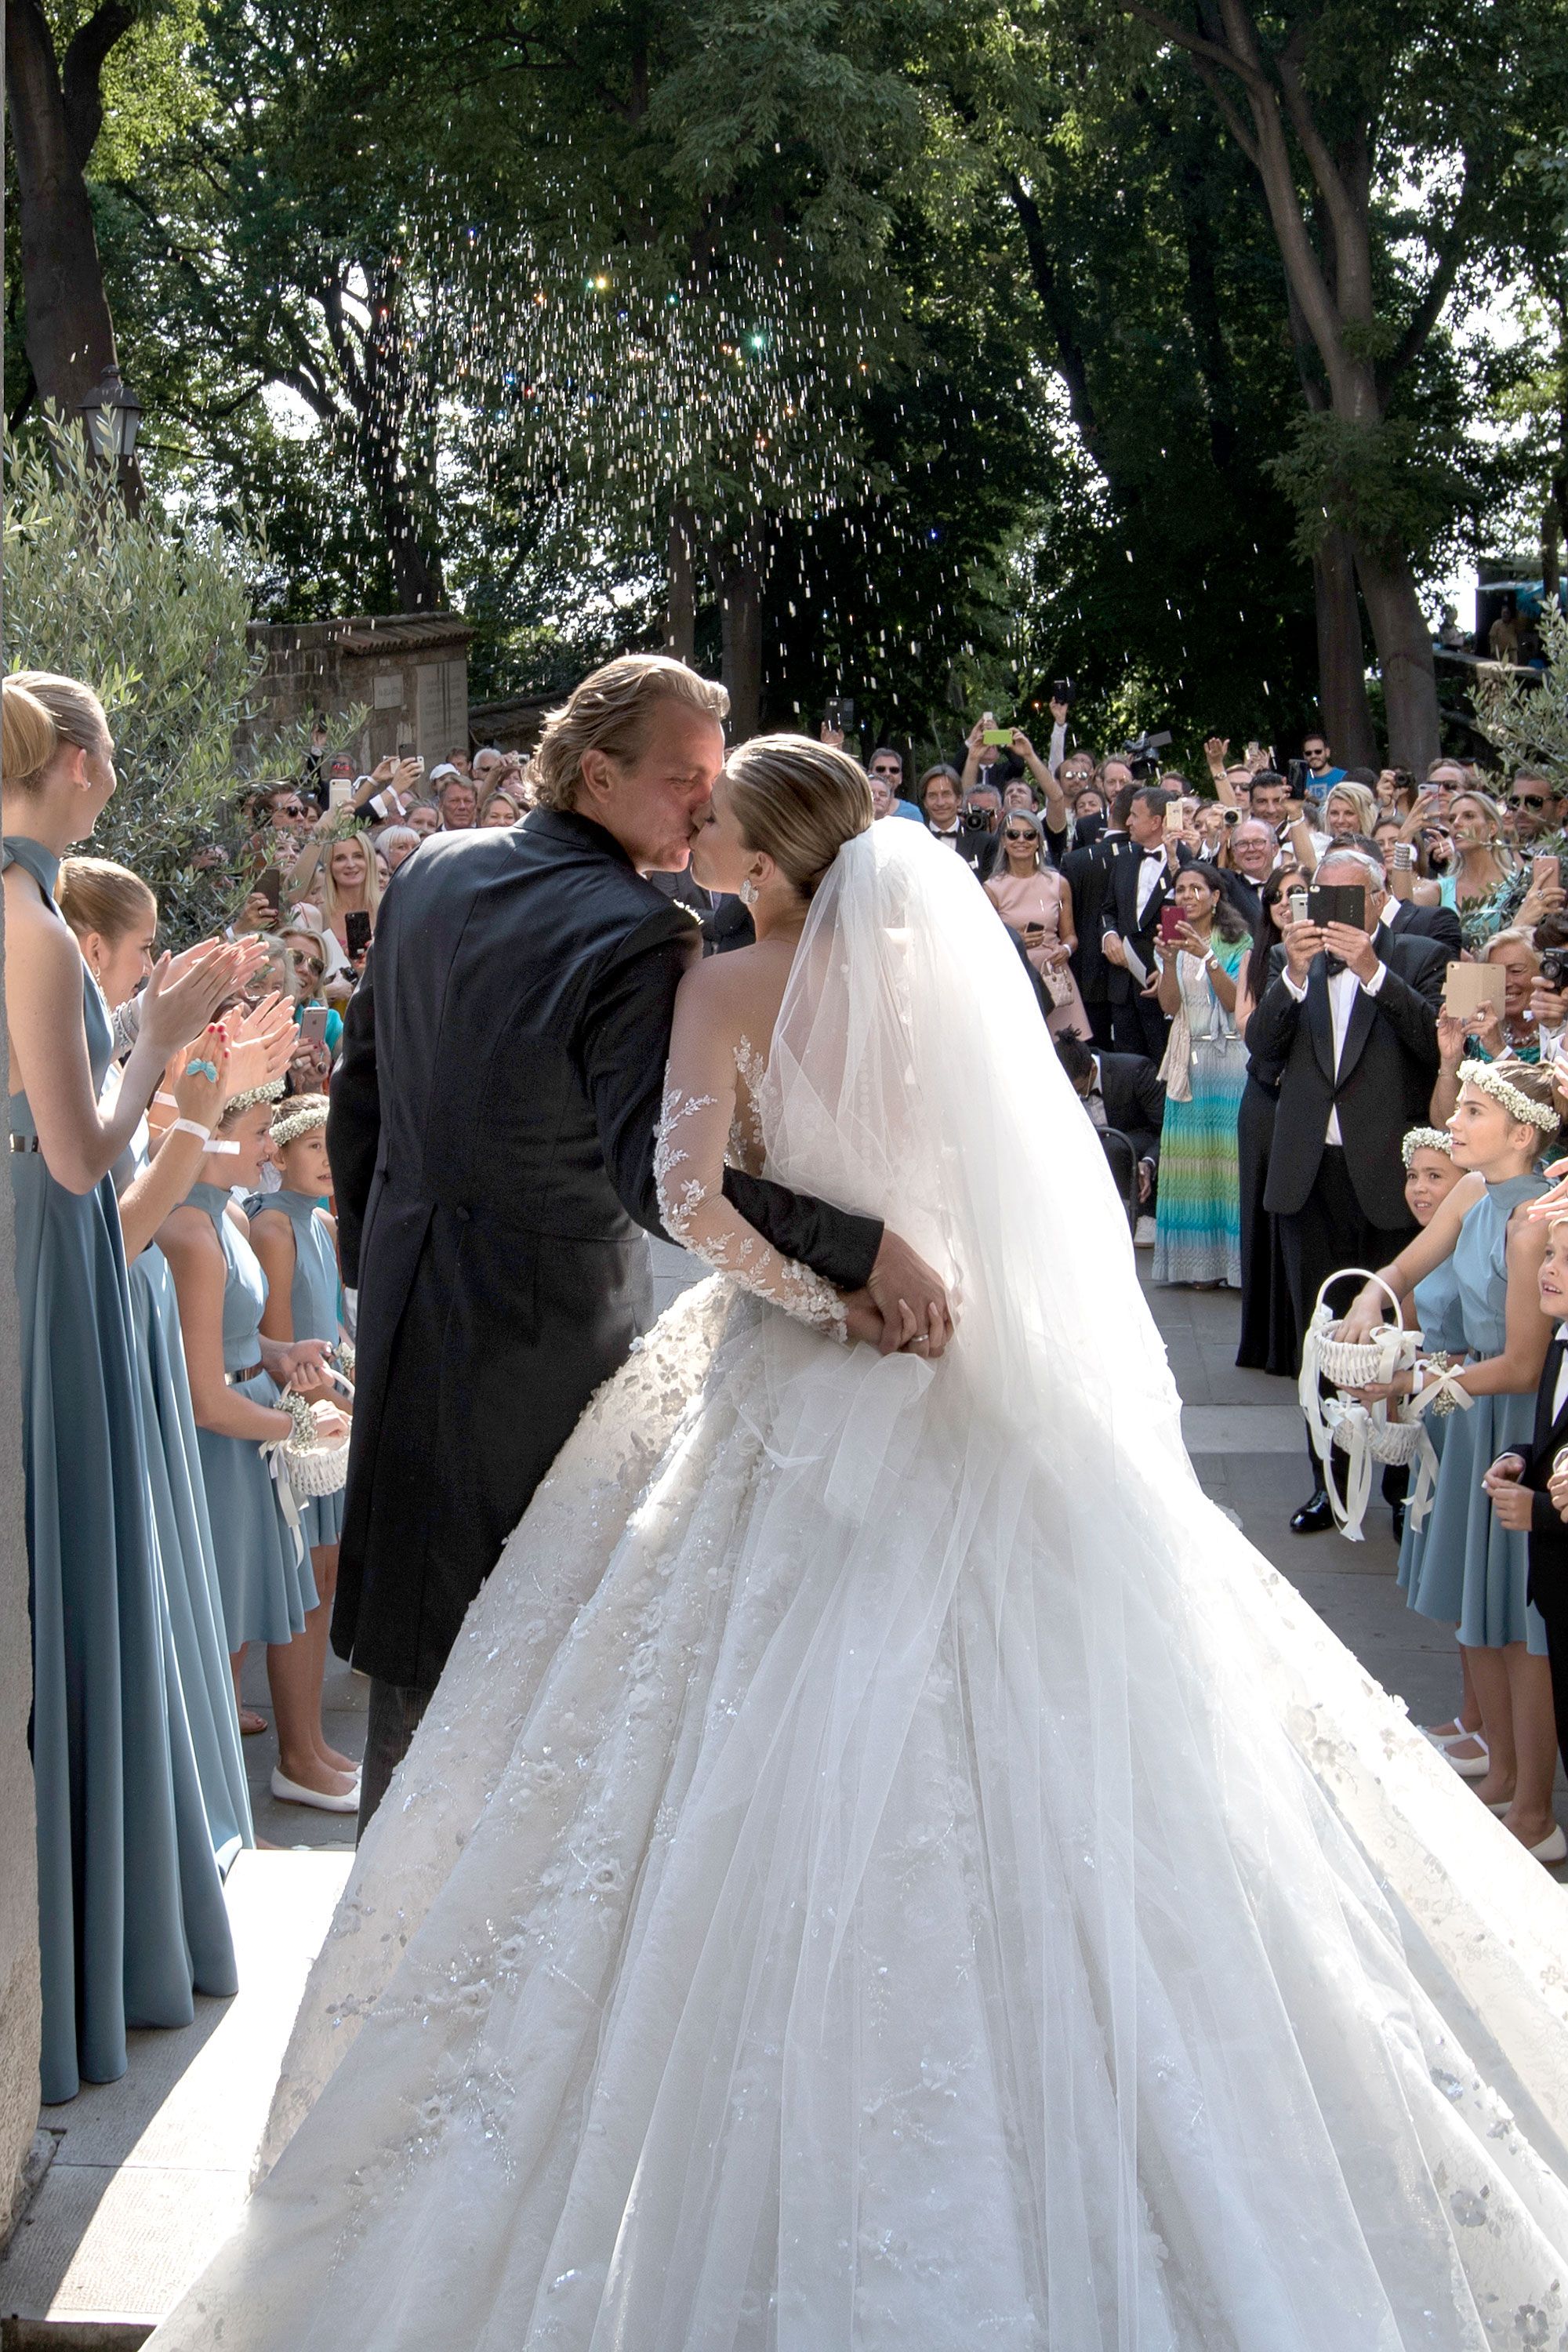 This Swarovski Heiress's Wedding Is Basically a Real-Life Fairytale